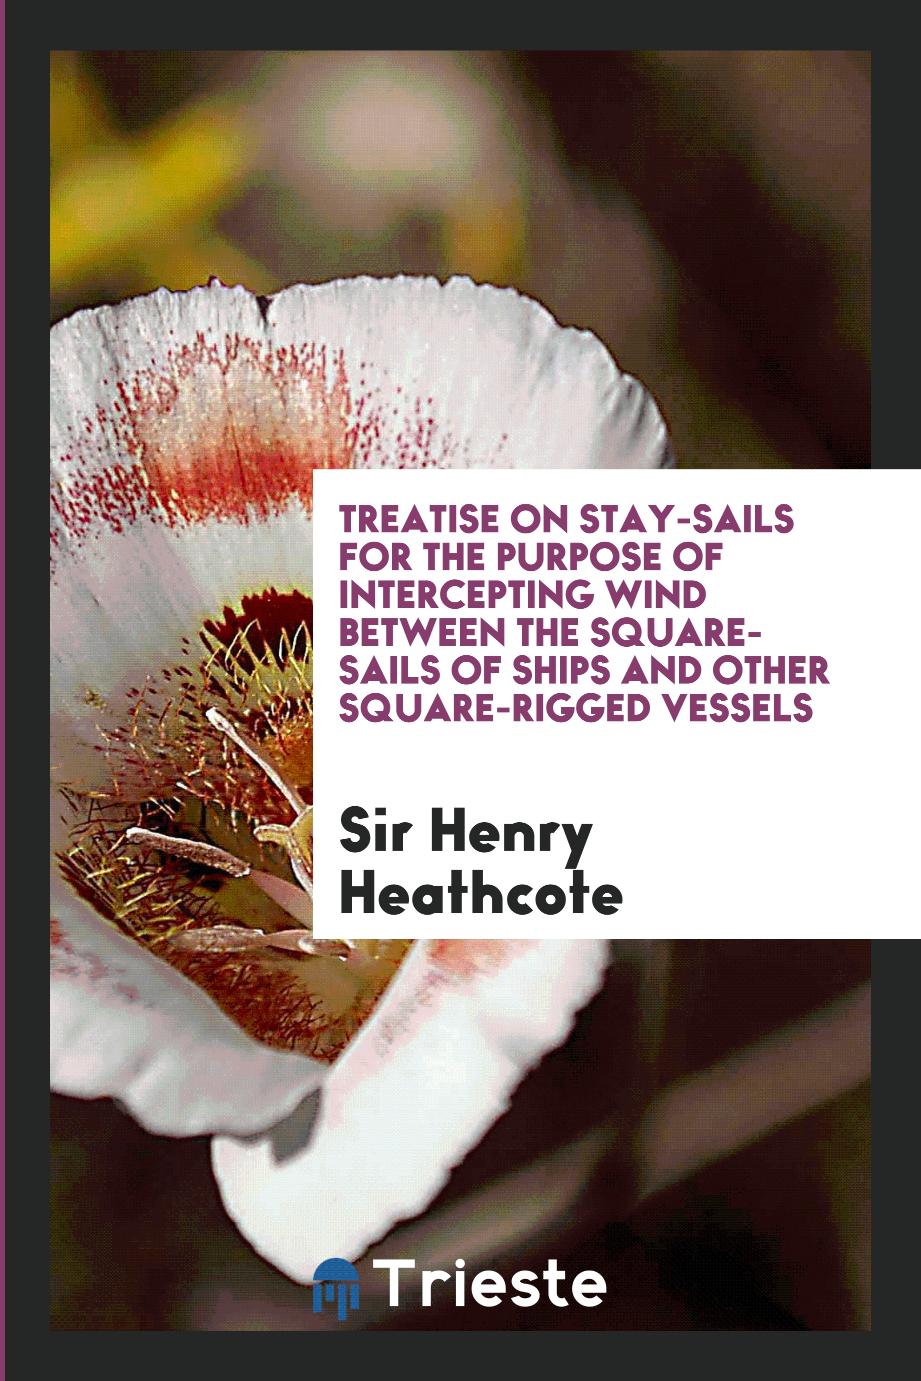 Treatise on Stay-Sails for the Purpose of Intercepting Wind Between the Square-Sails of Ships and Other Square-Rigged Vessels